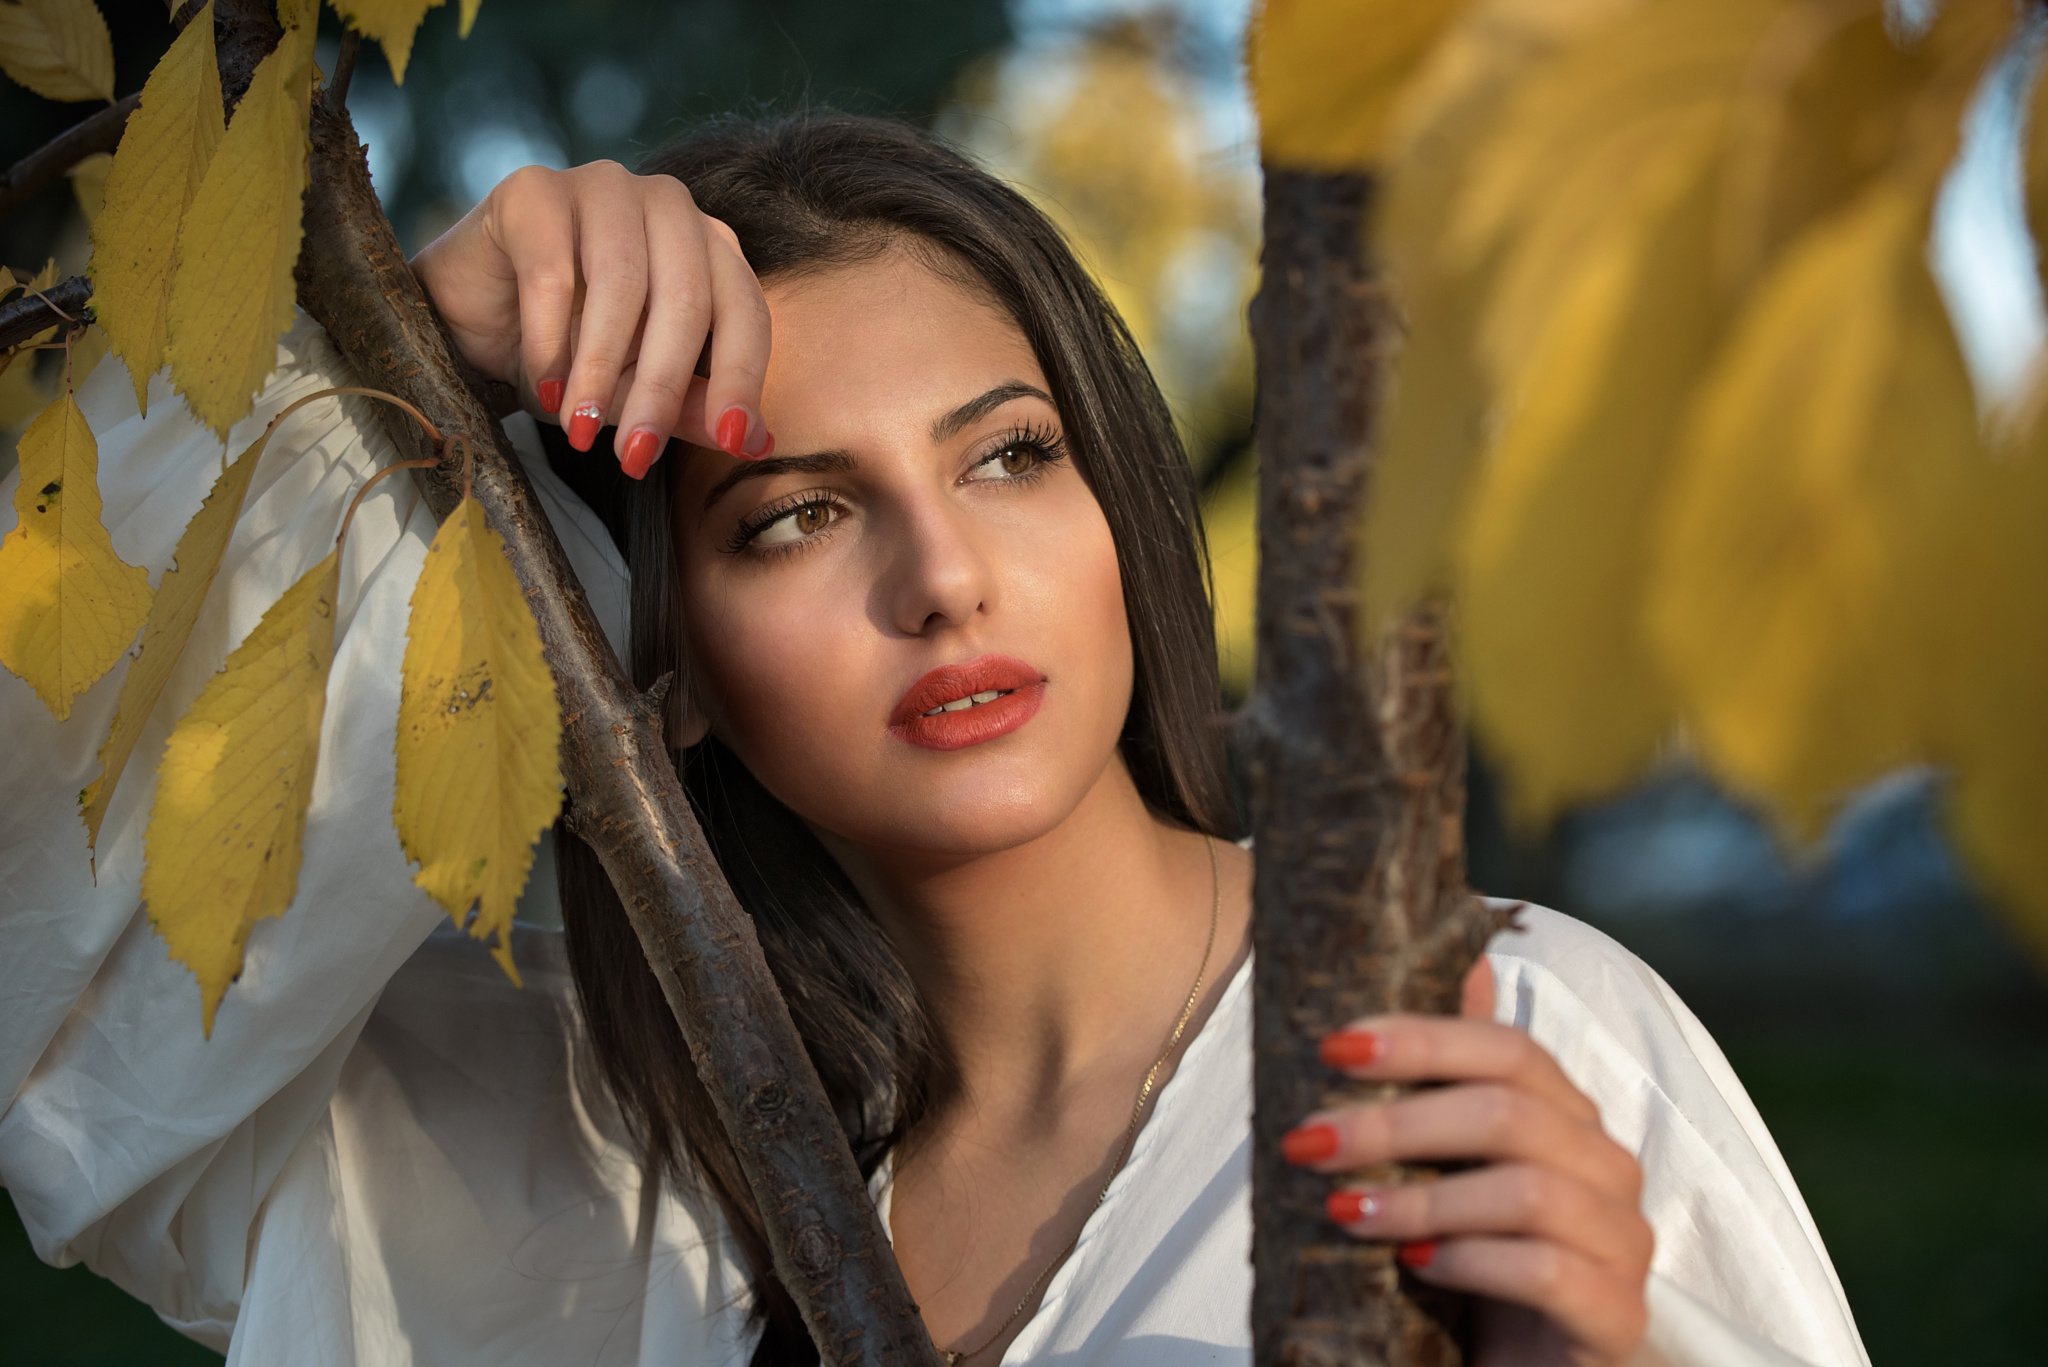 People 2048x1367 model women red lipstick face painted nails leaves women outdoors white shirt red nails brown eyes necklace trees looking away brunette dark hair